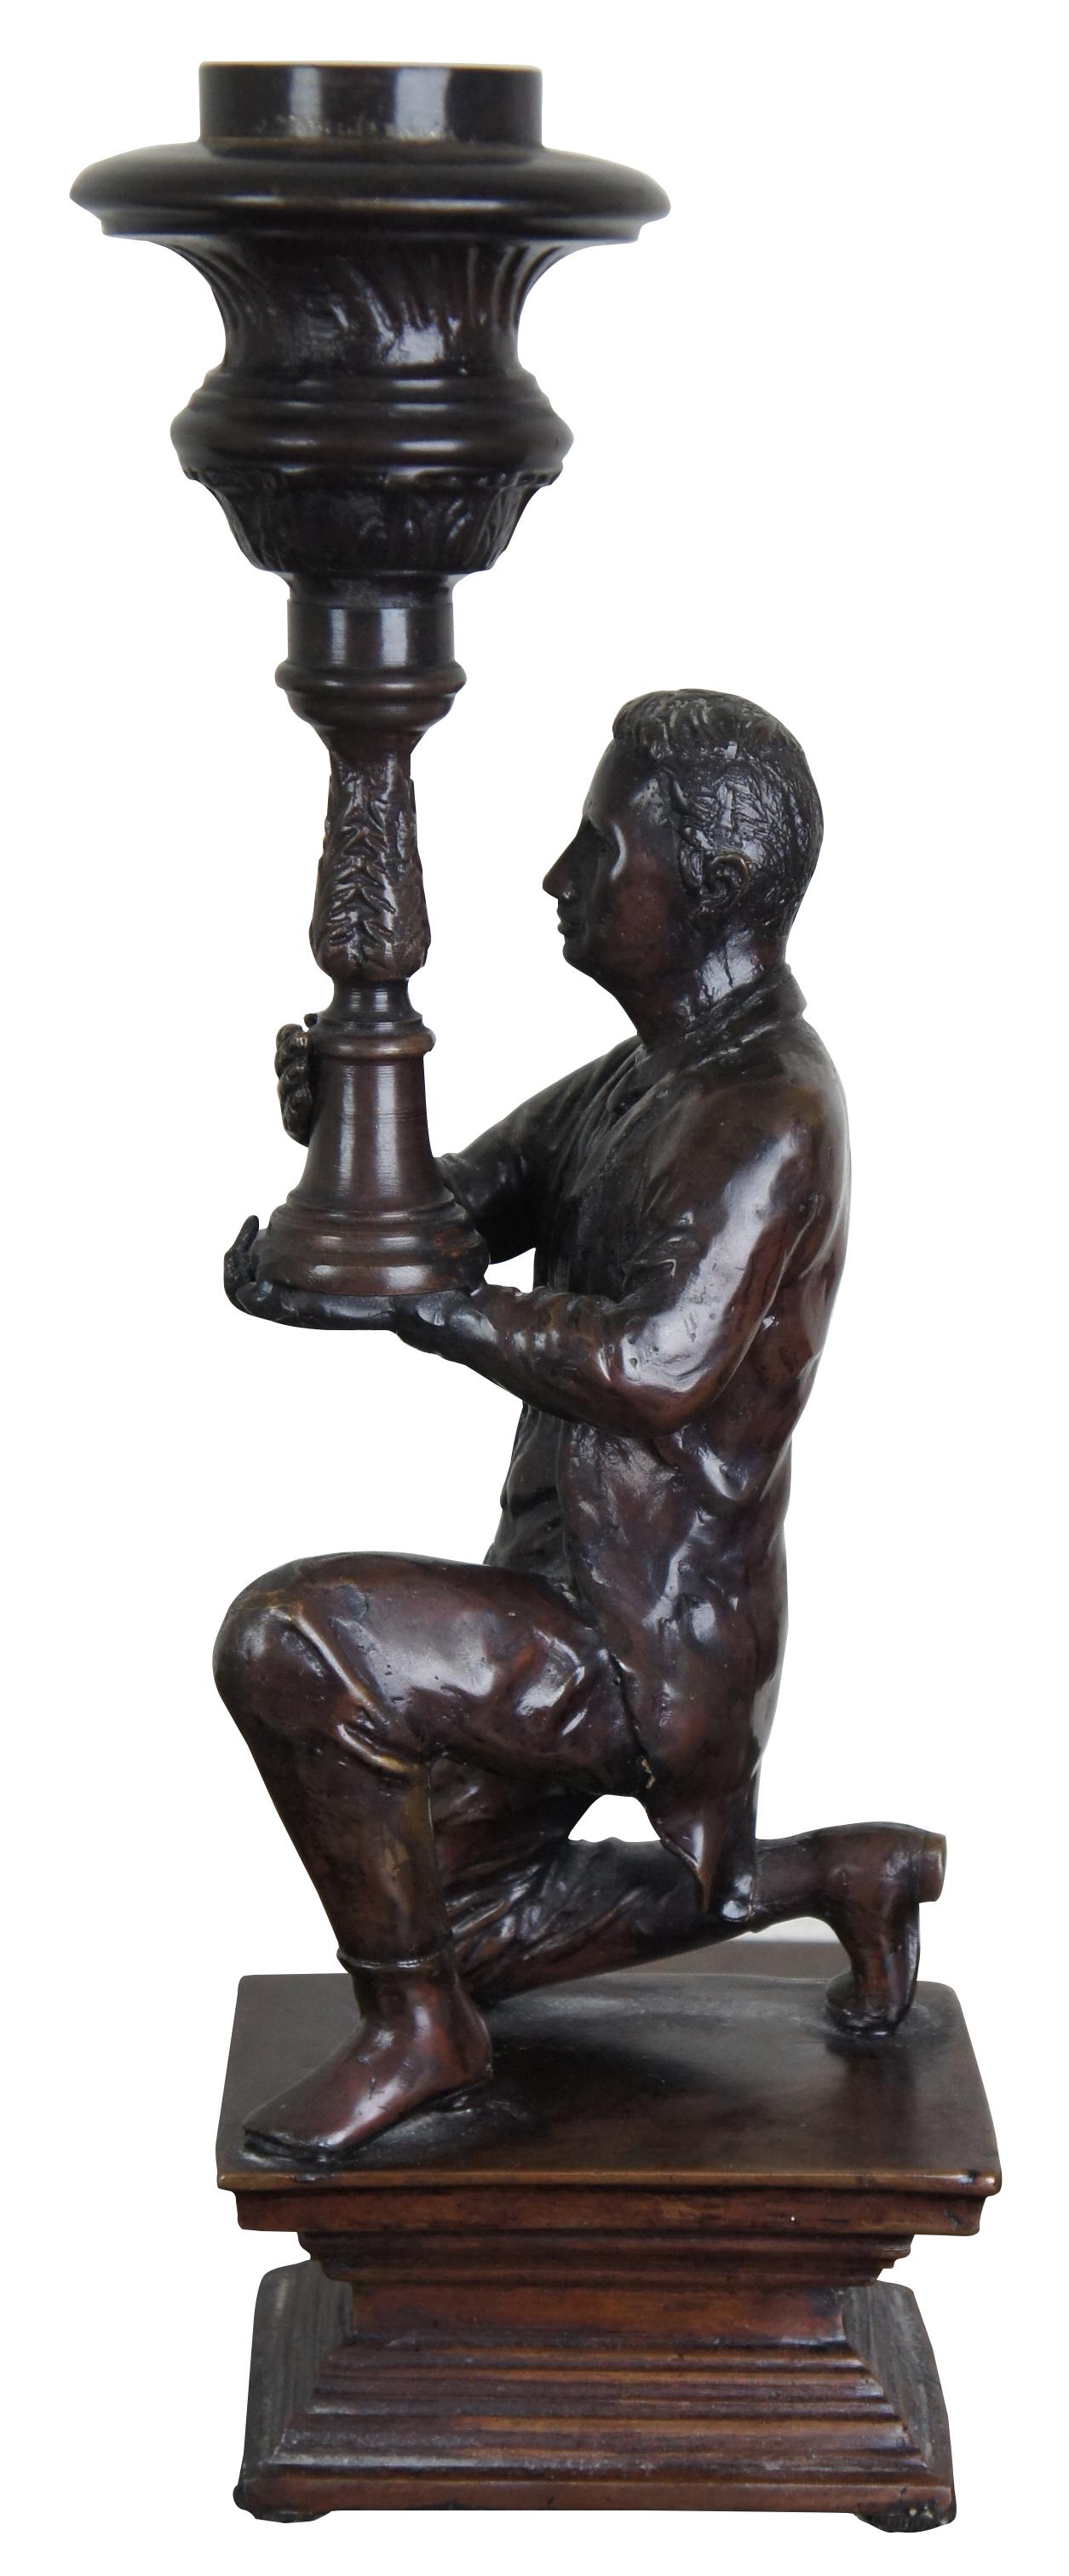 British Colonial Maitland Smith Figural Bronze Candleholder Colonial Man with Torch Statue